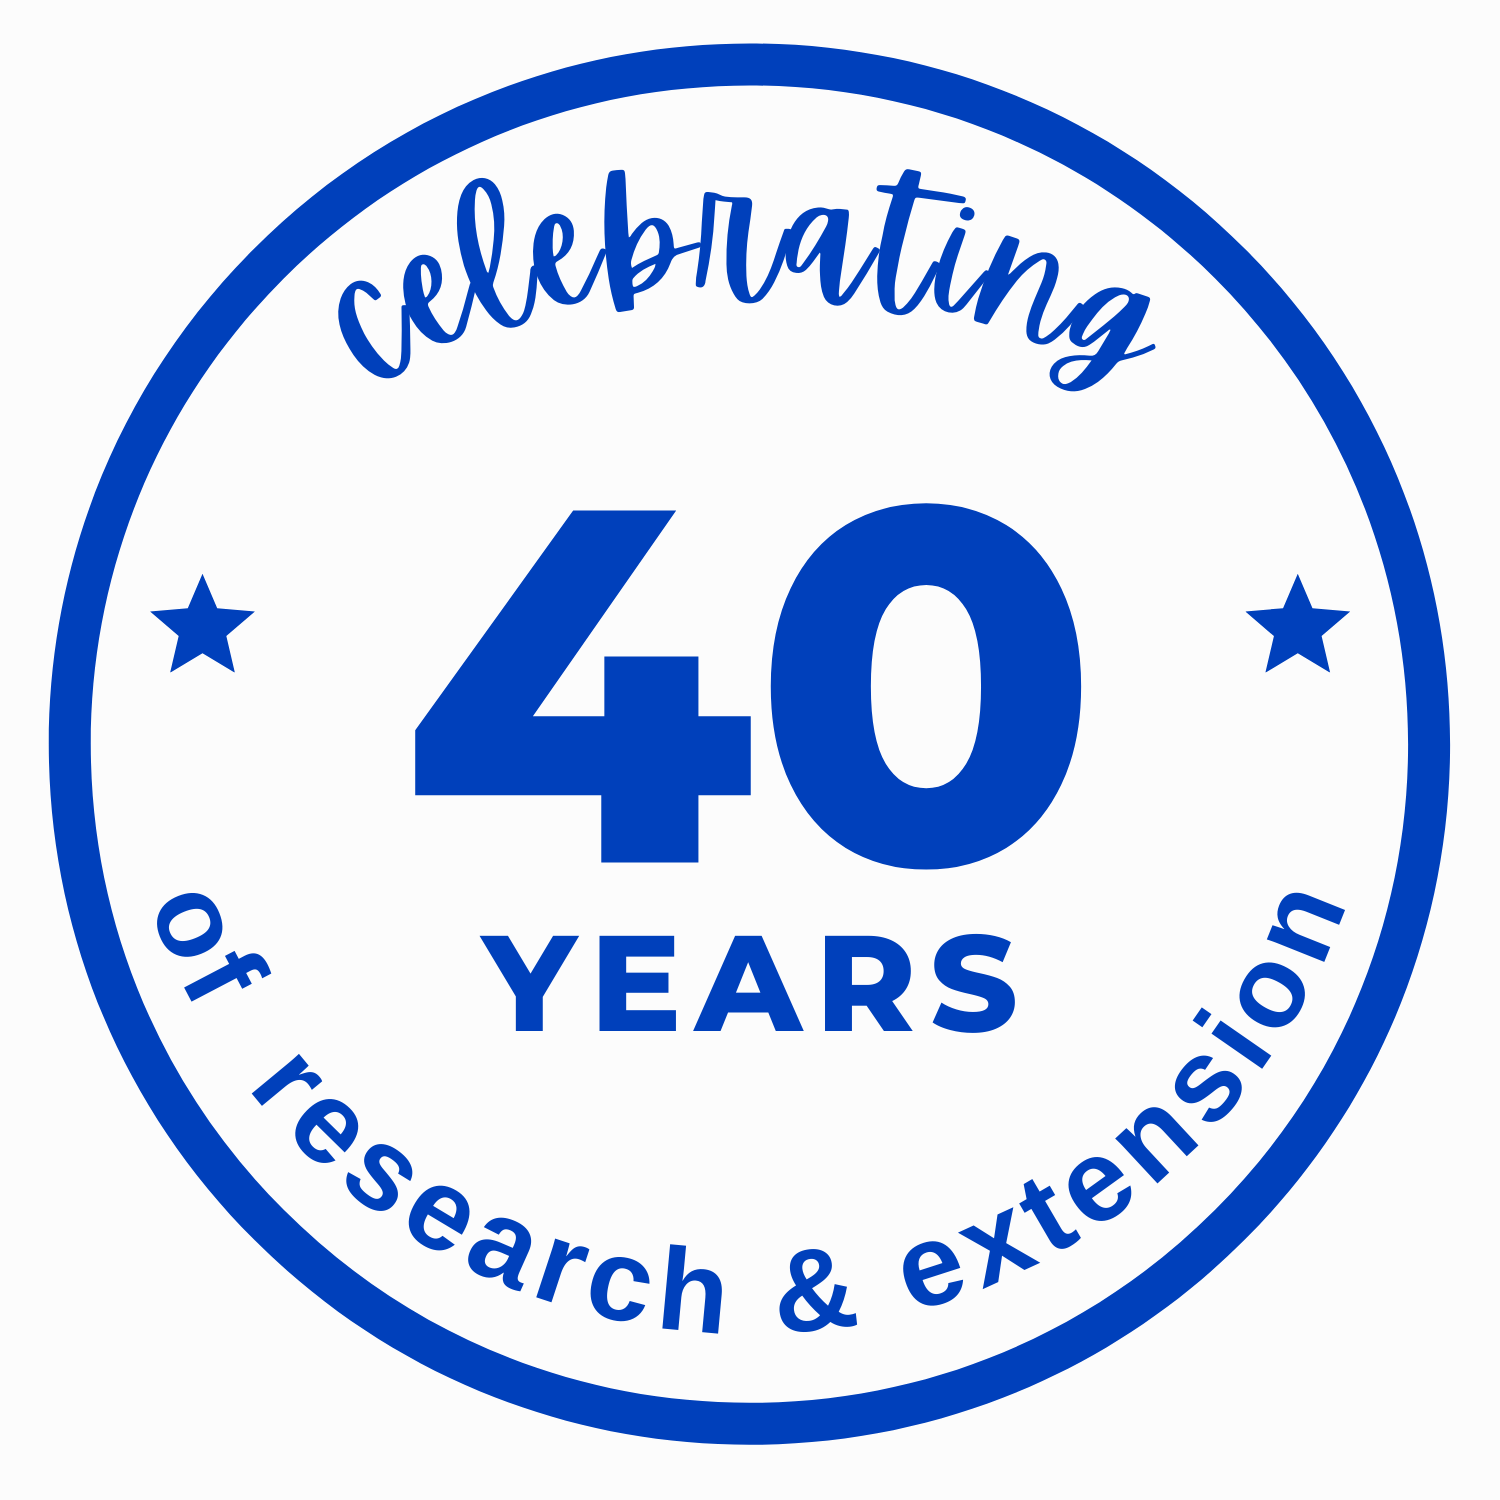 Hart - celebrating 40 years of research and extention in 2022